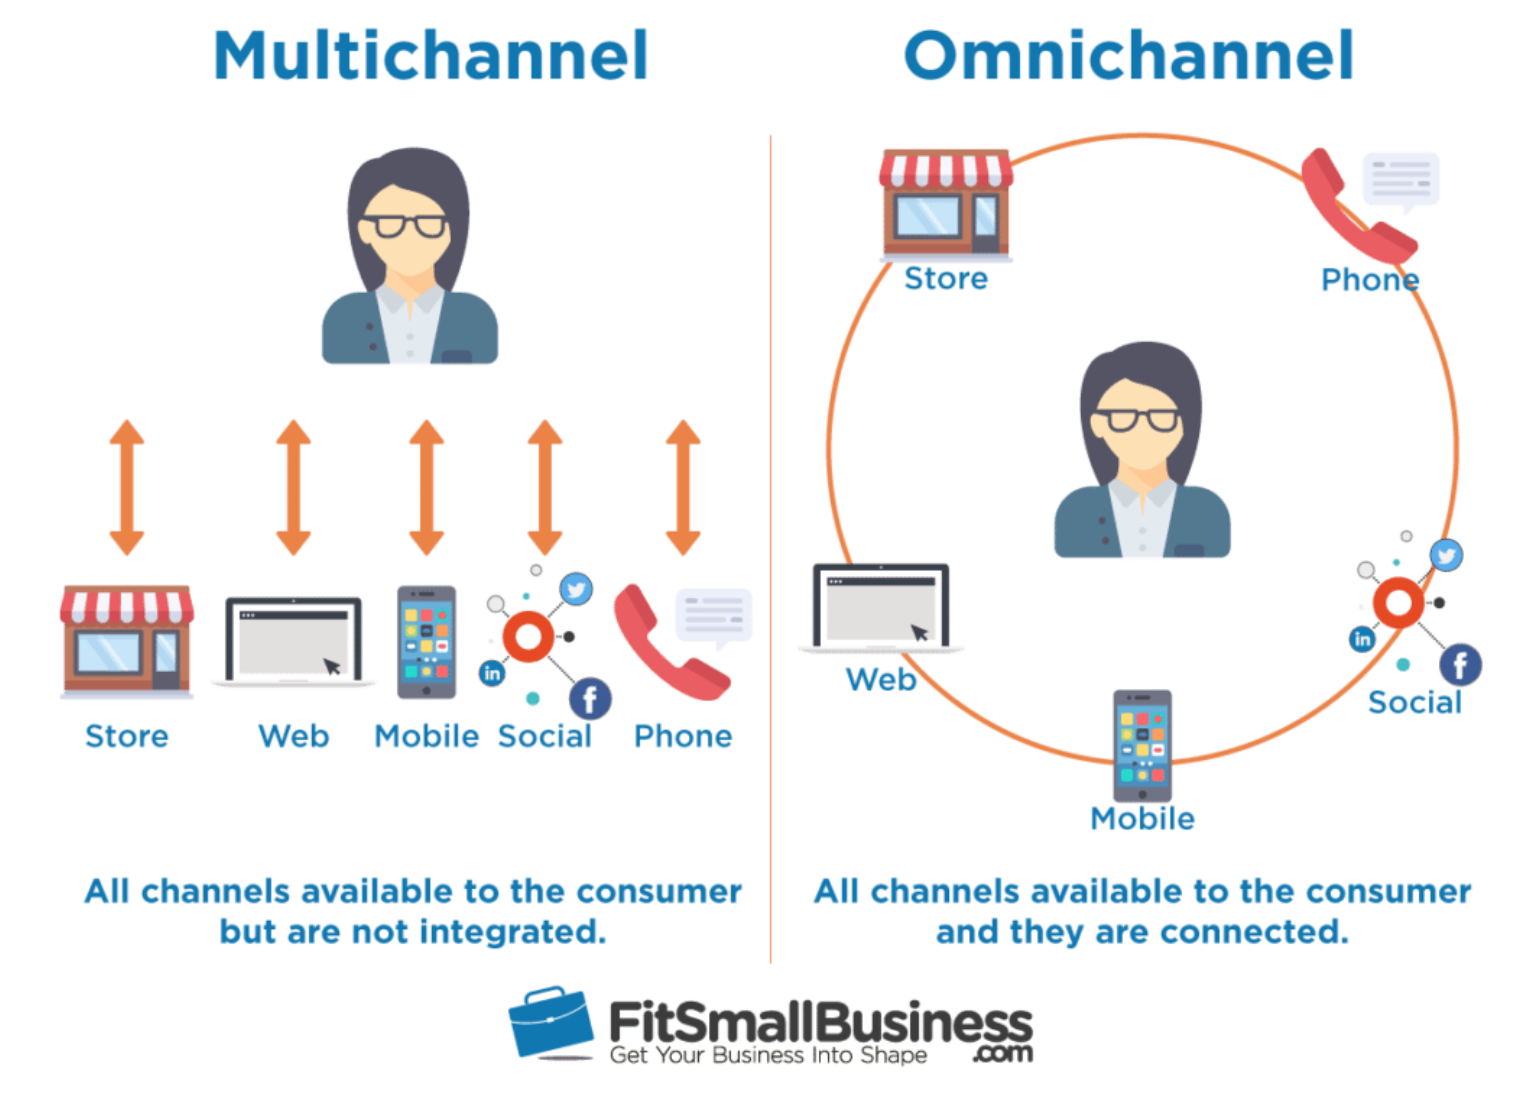 Graphic demonstrating the difference between multichannel and omnichannel strategies.